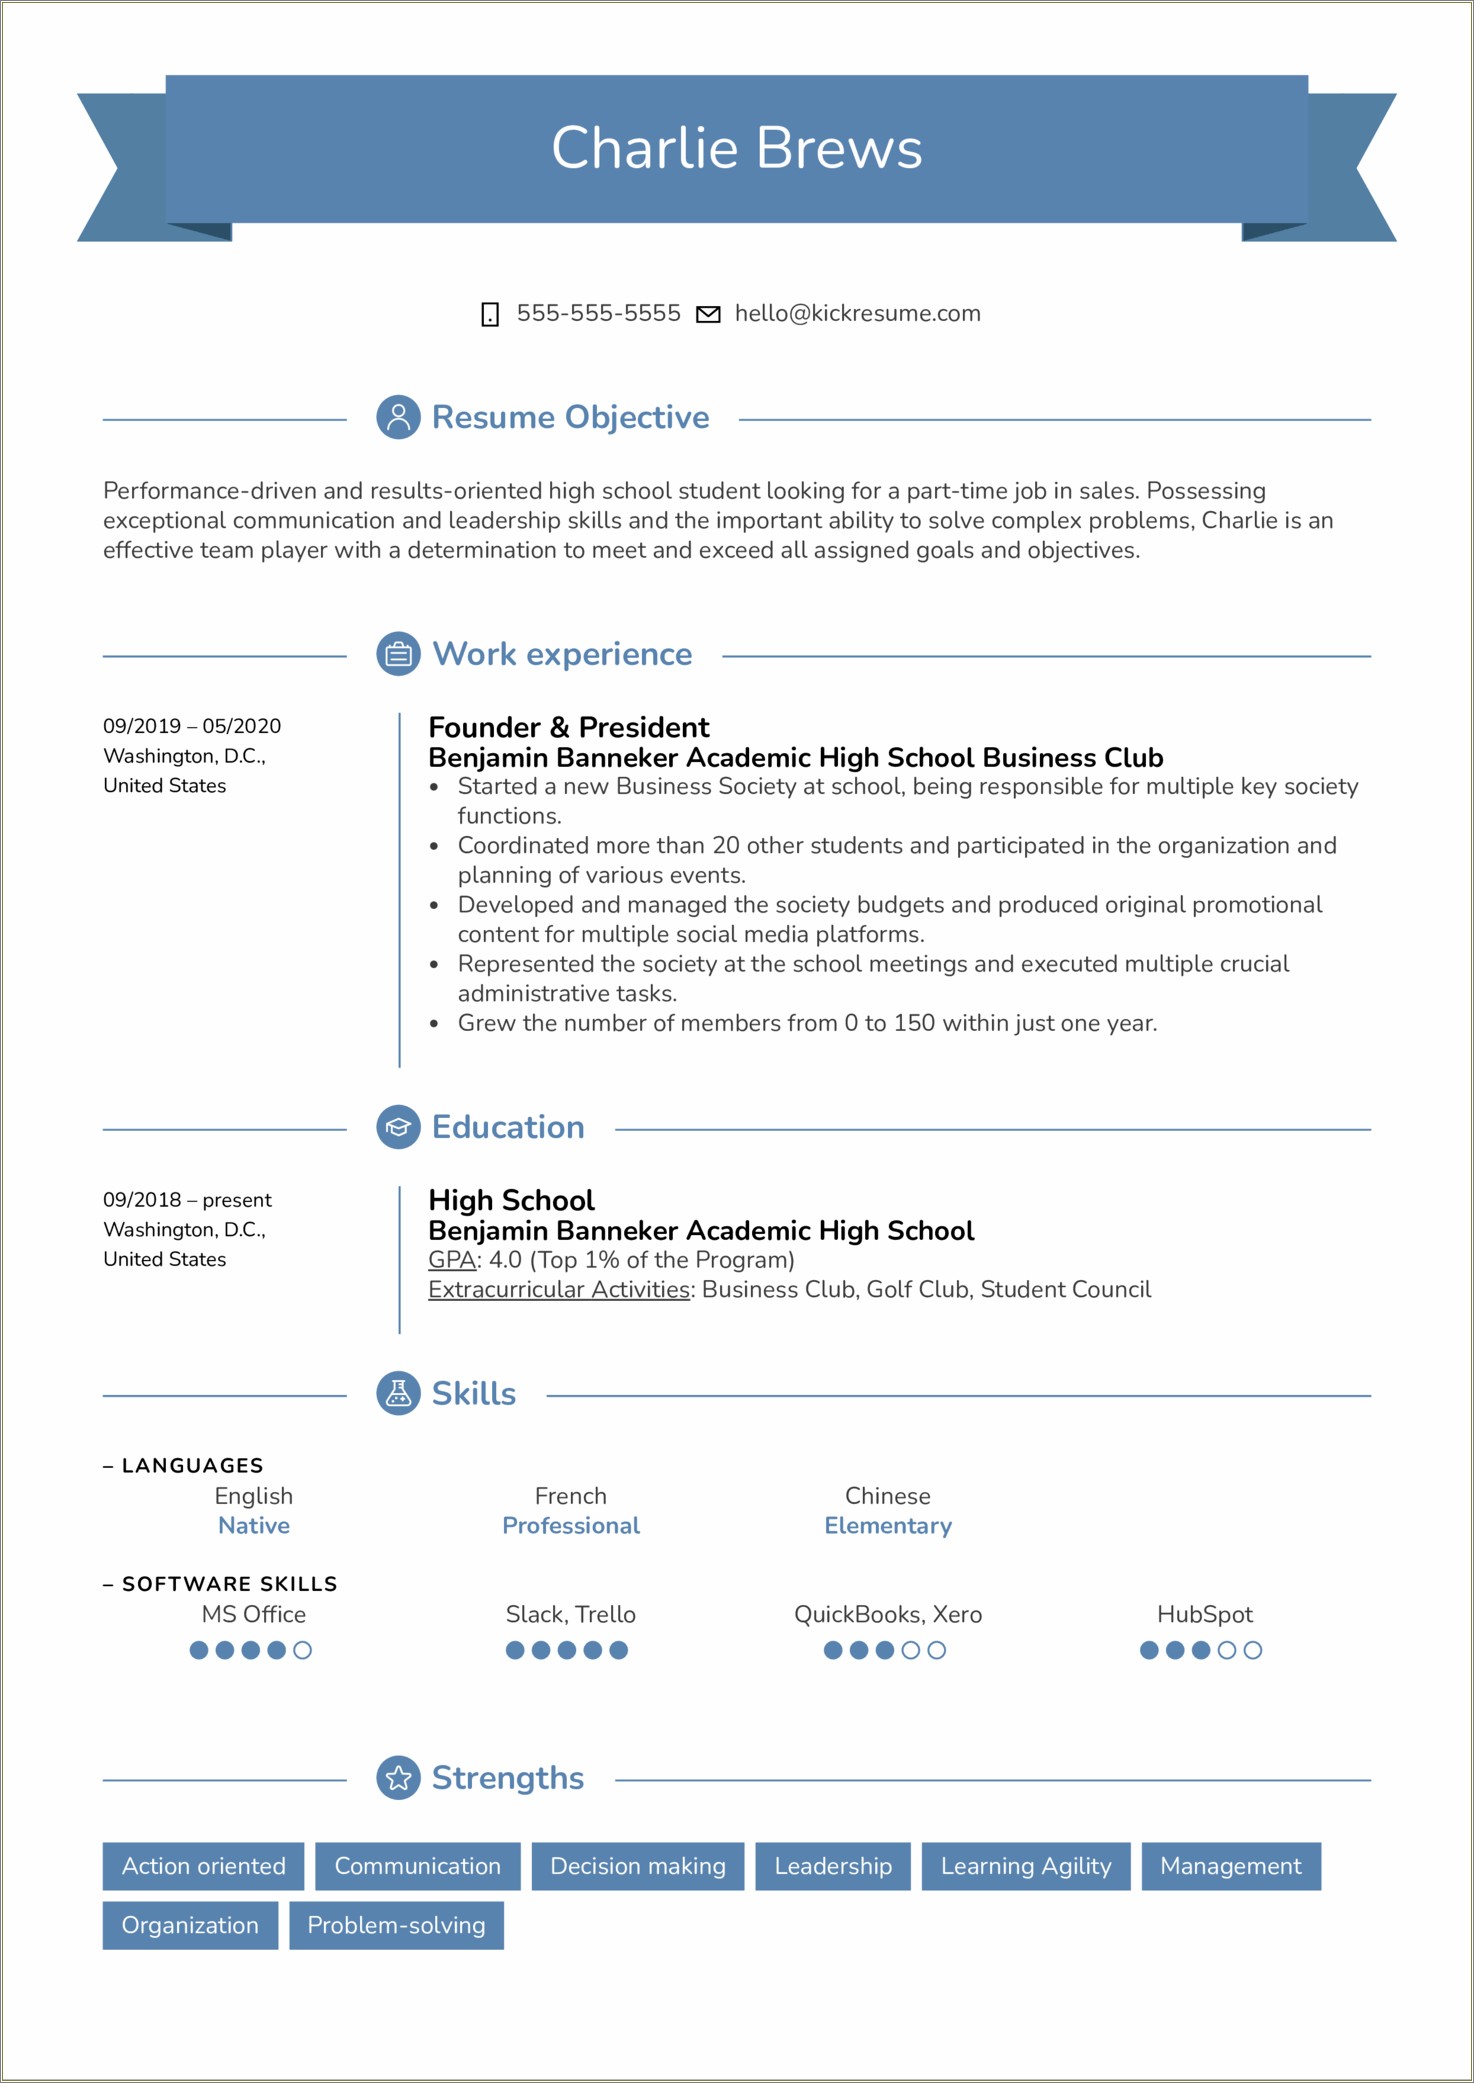 Best Resume Format To Use For Professional Jobs